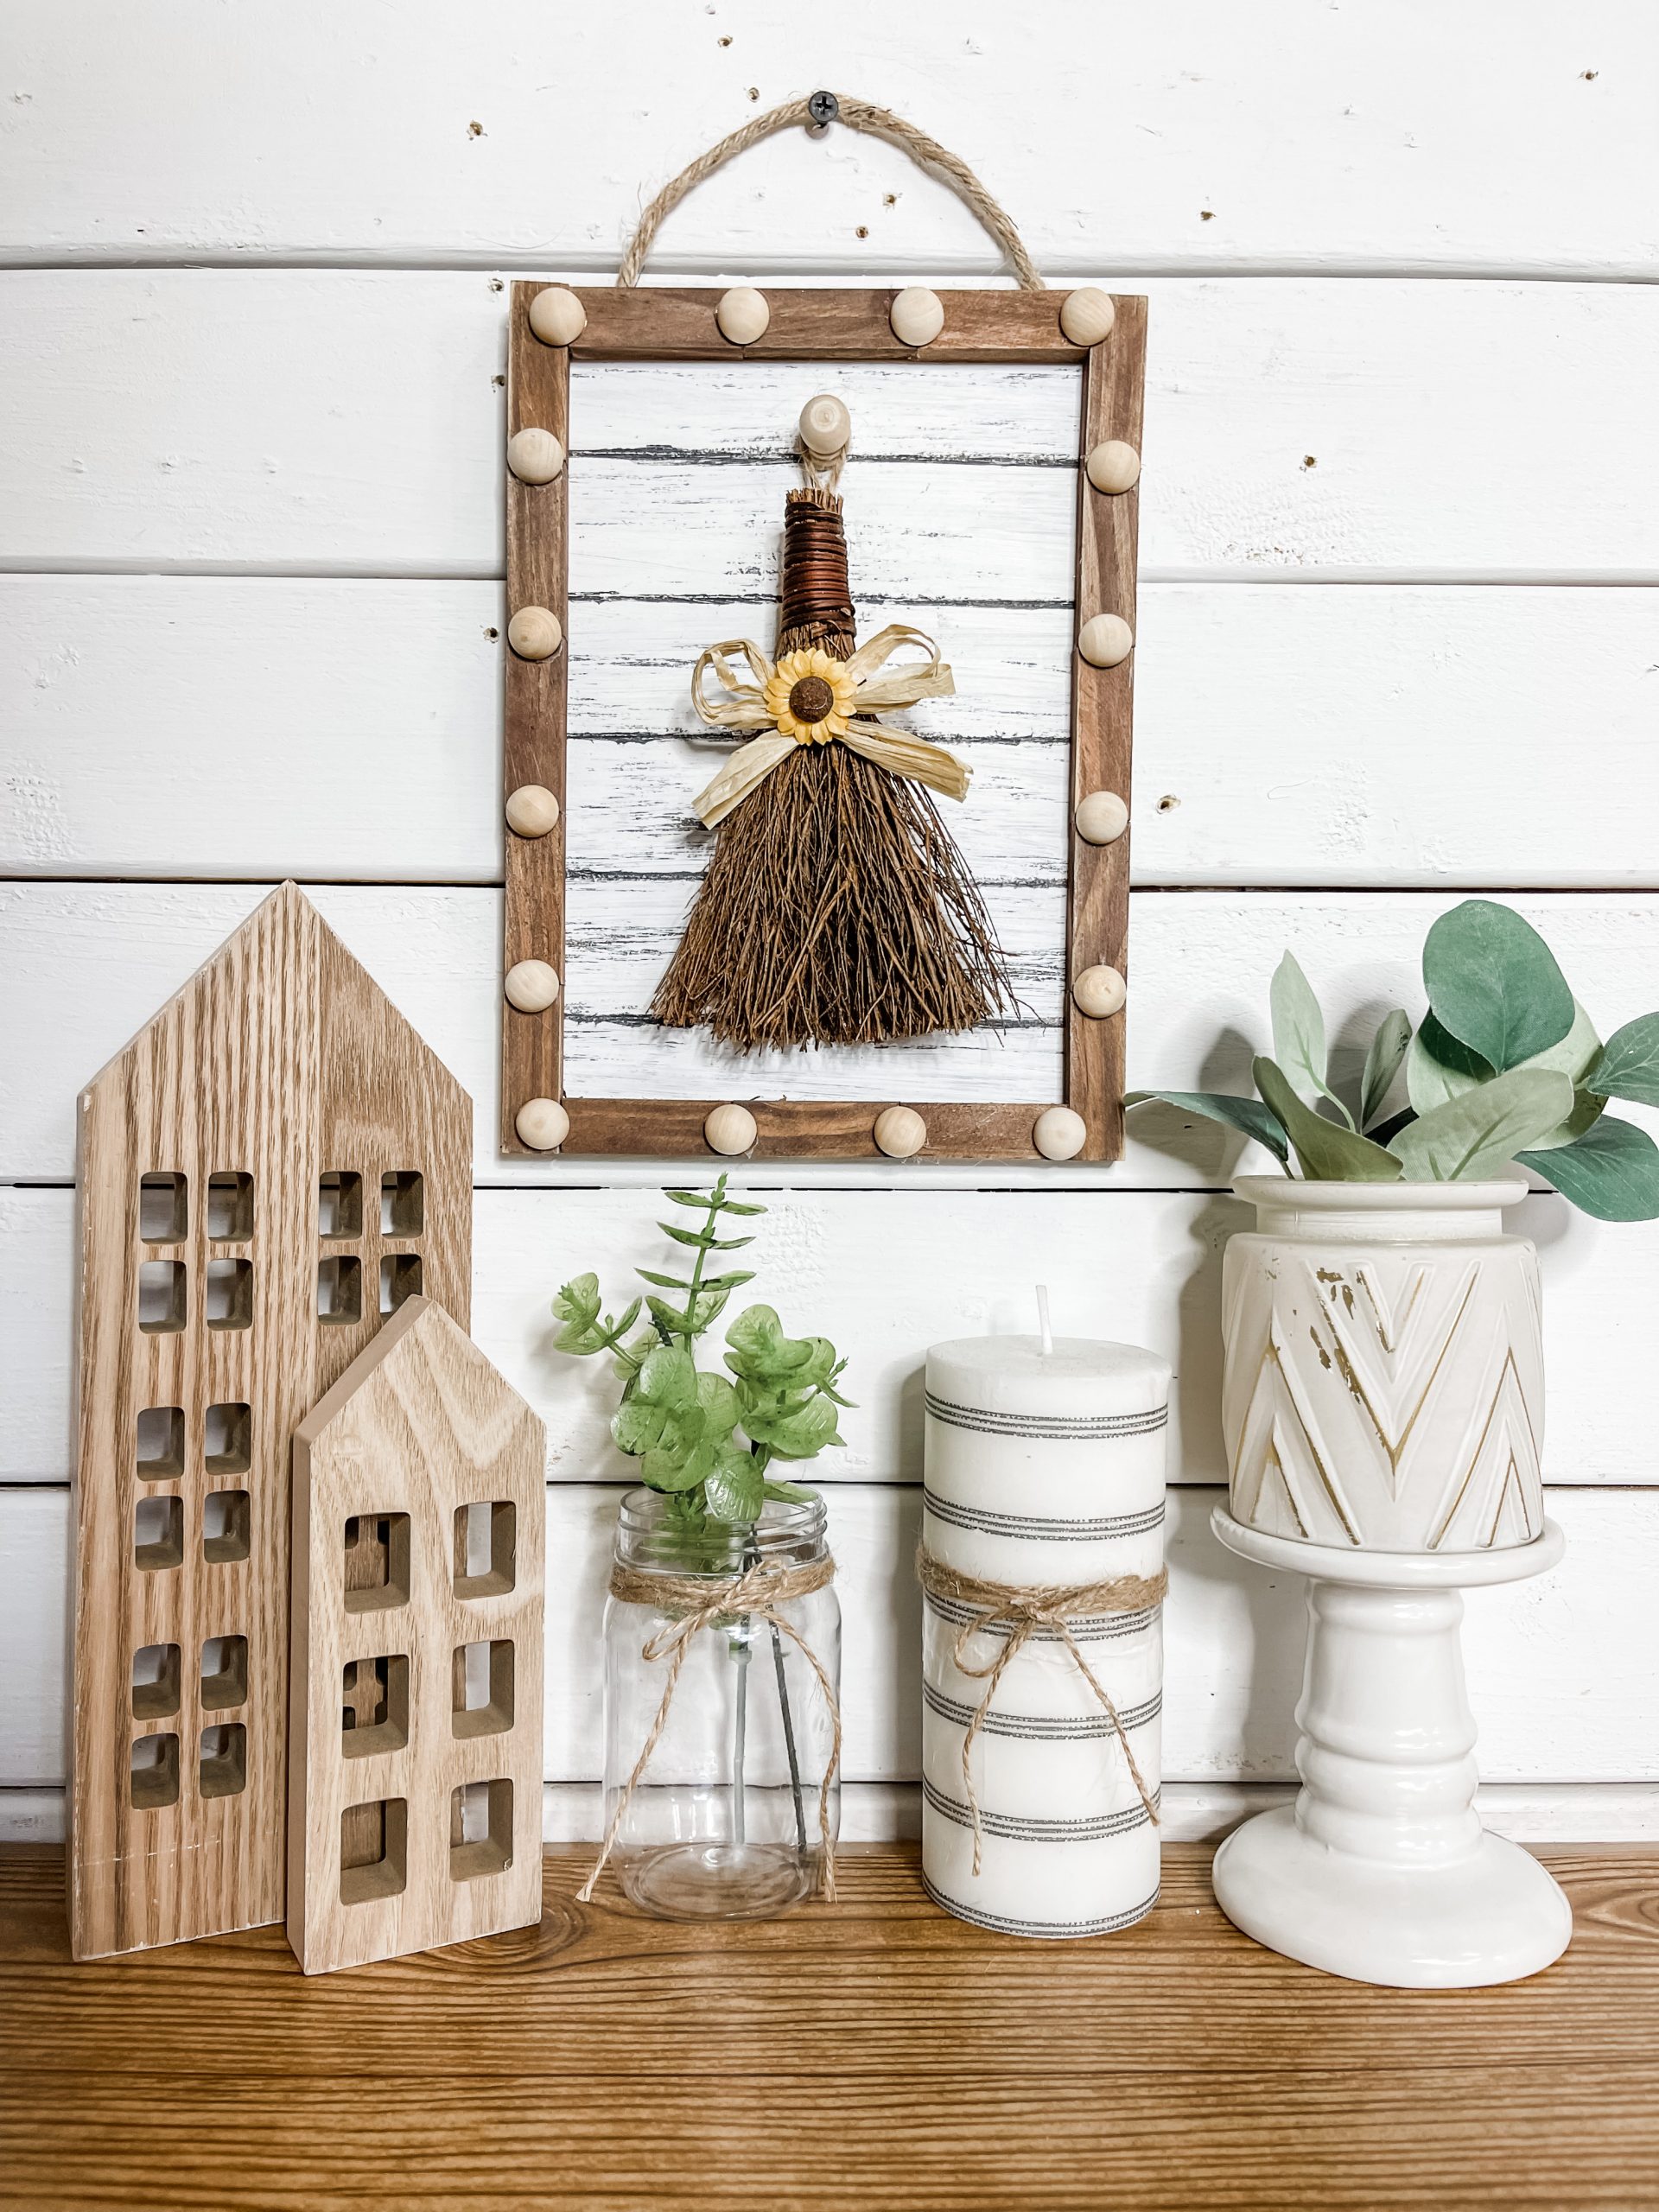 DIY Fall Home Decor with Pumpkin Spice Scented Broom